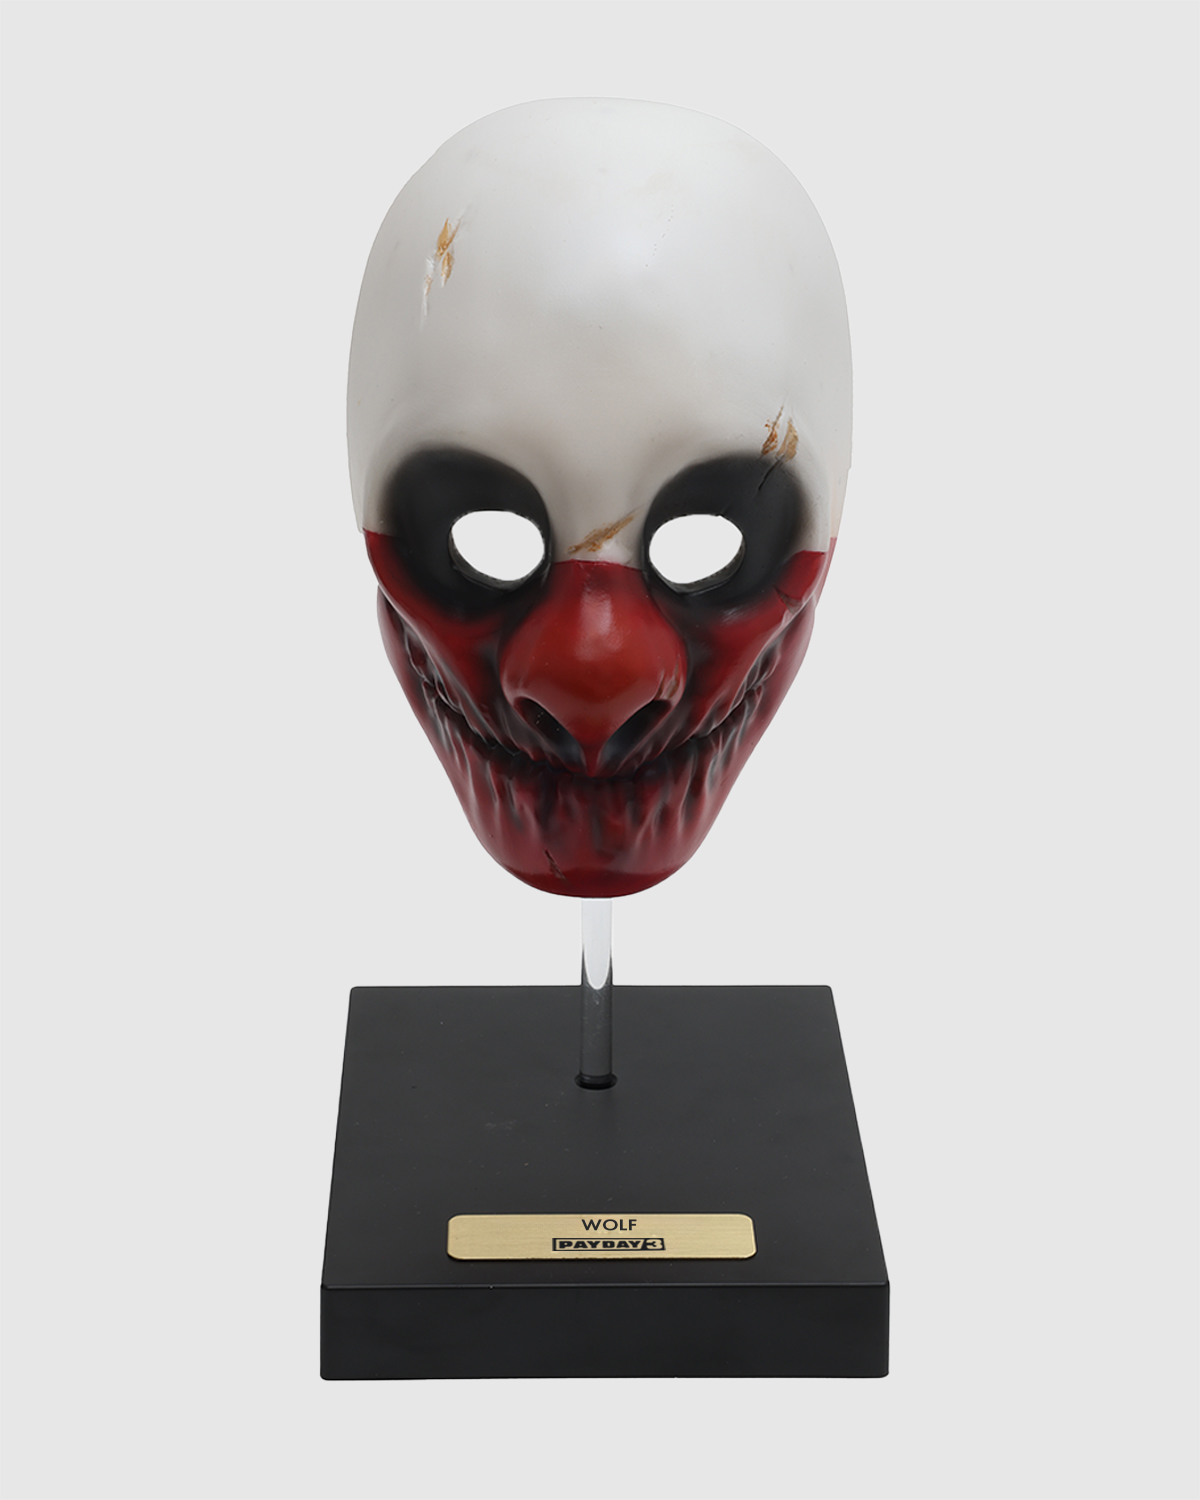 Limited Edition 1:2 scale Desktop Replica "Wolf Mask"